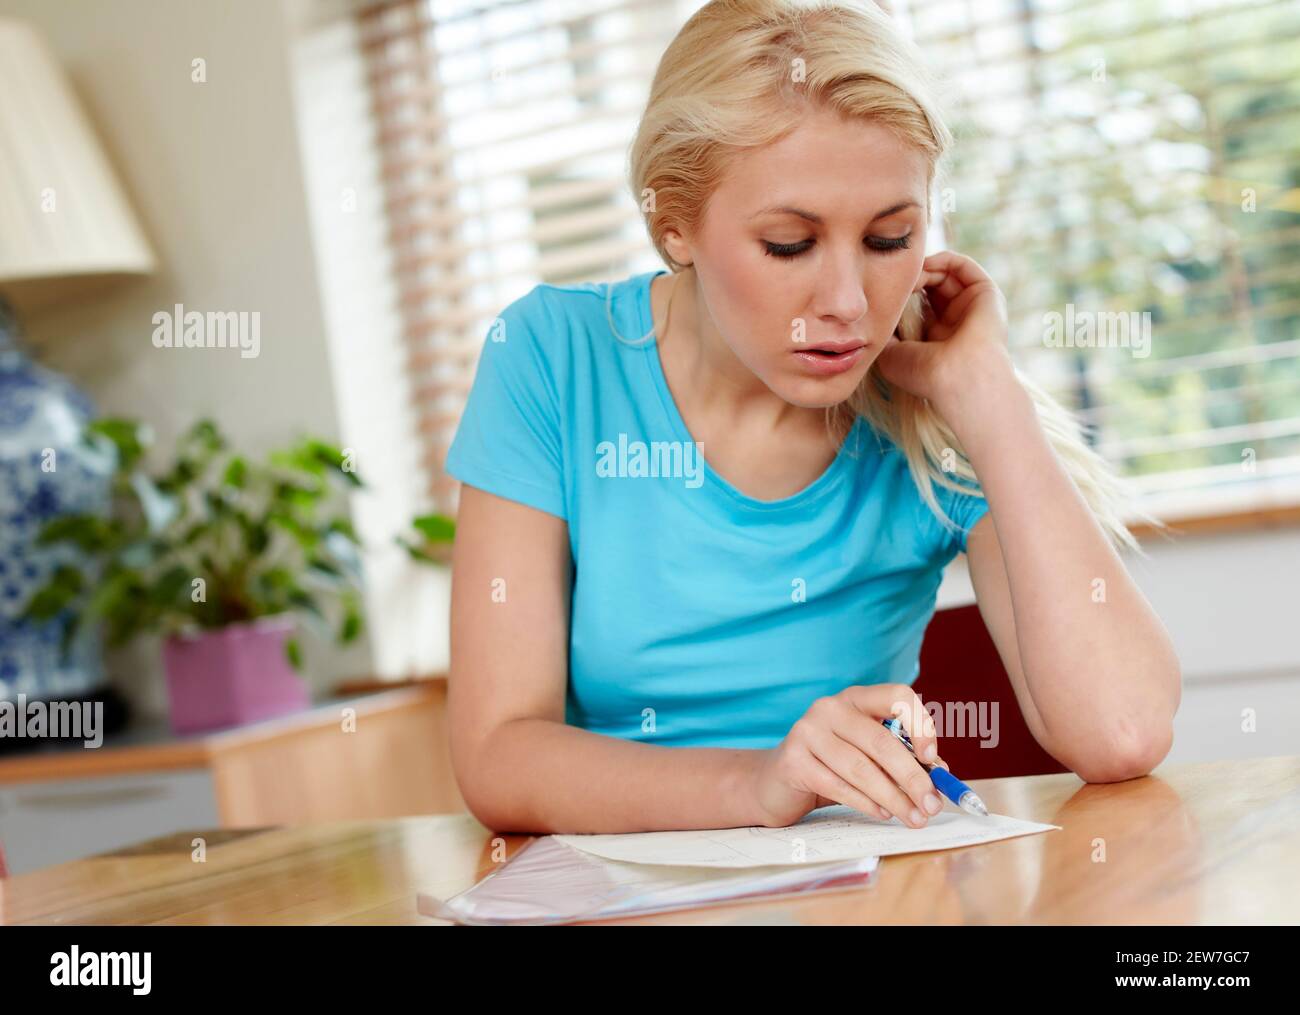 Woman writing letter Stock Photo